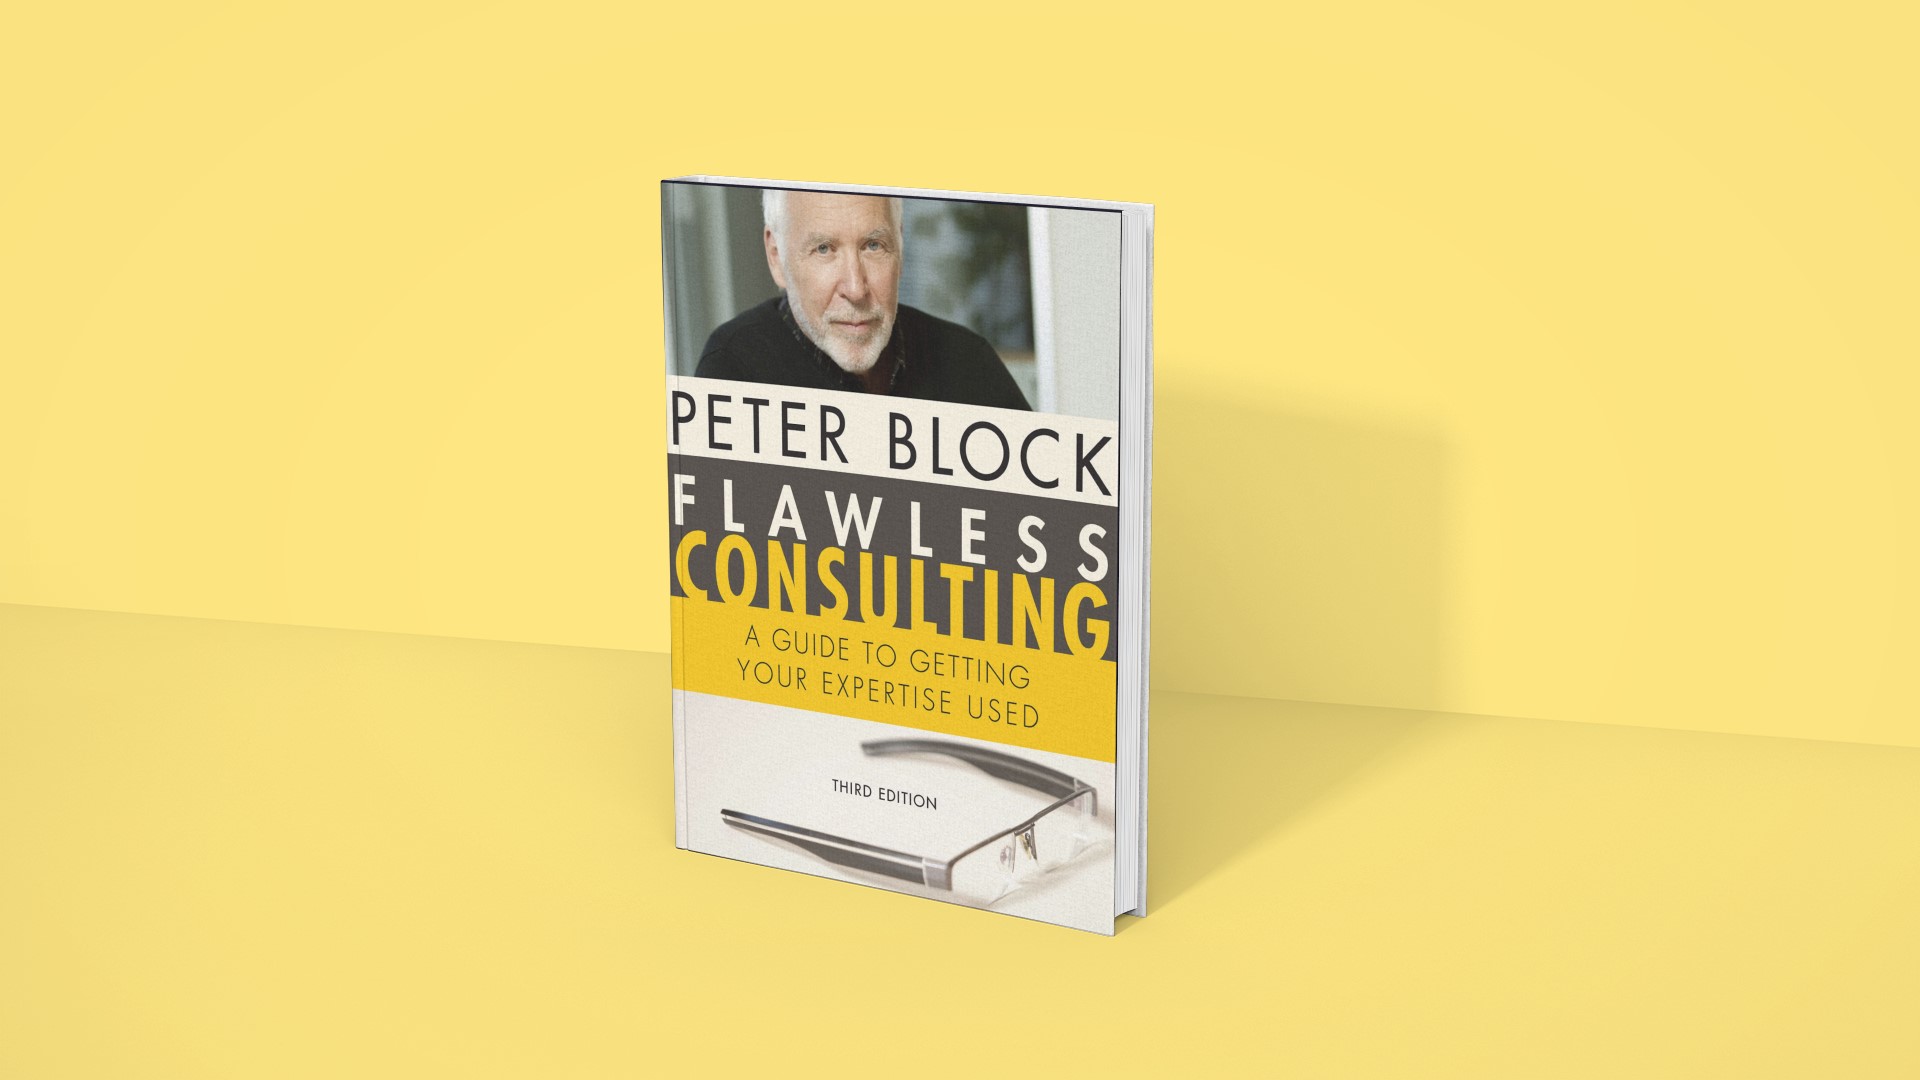 Flawless Consulting - Peter Block